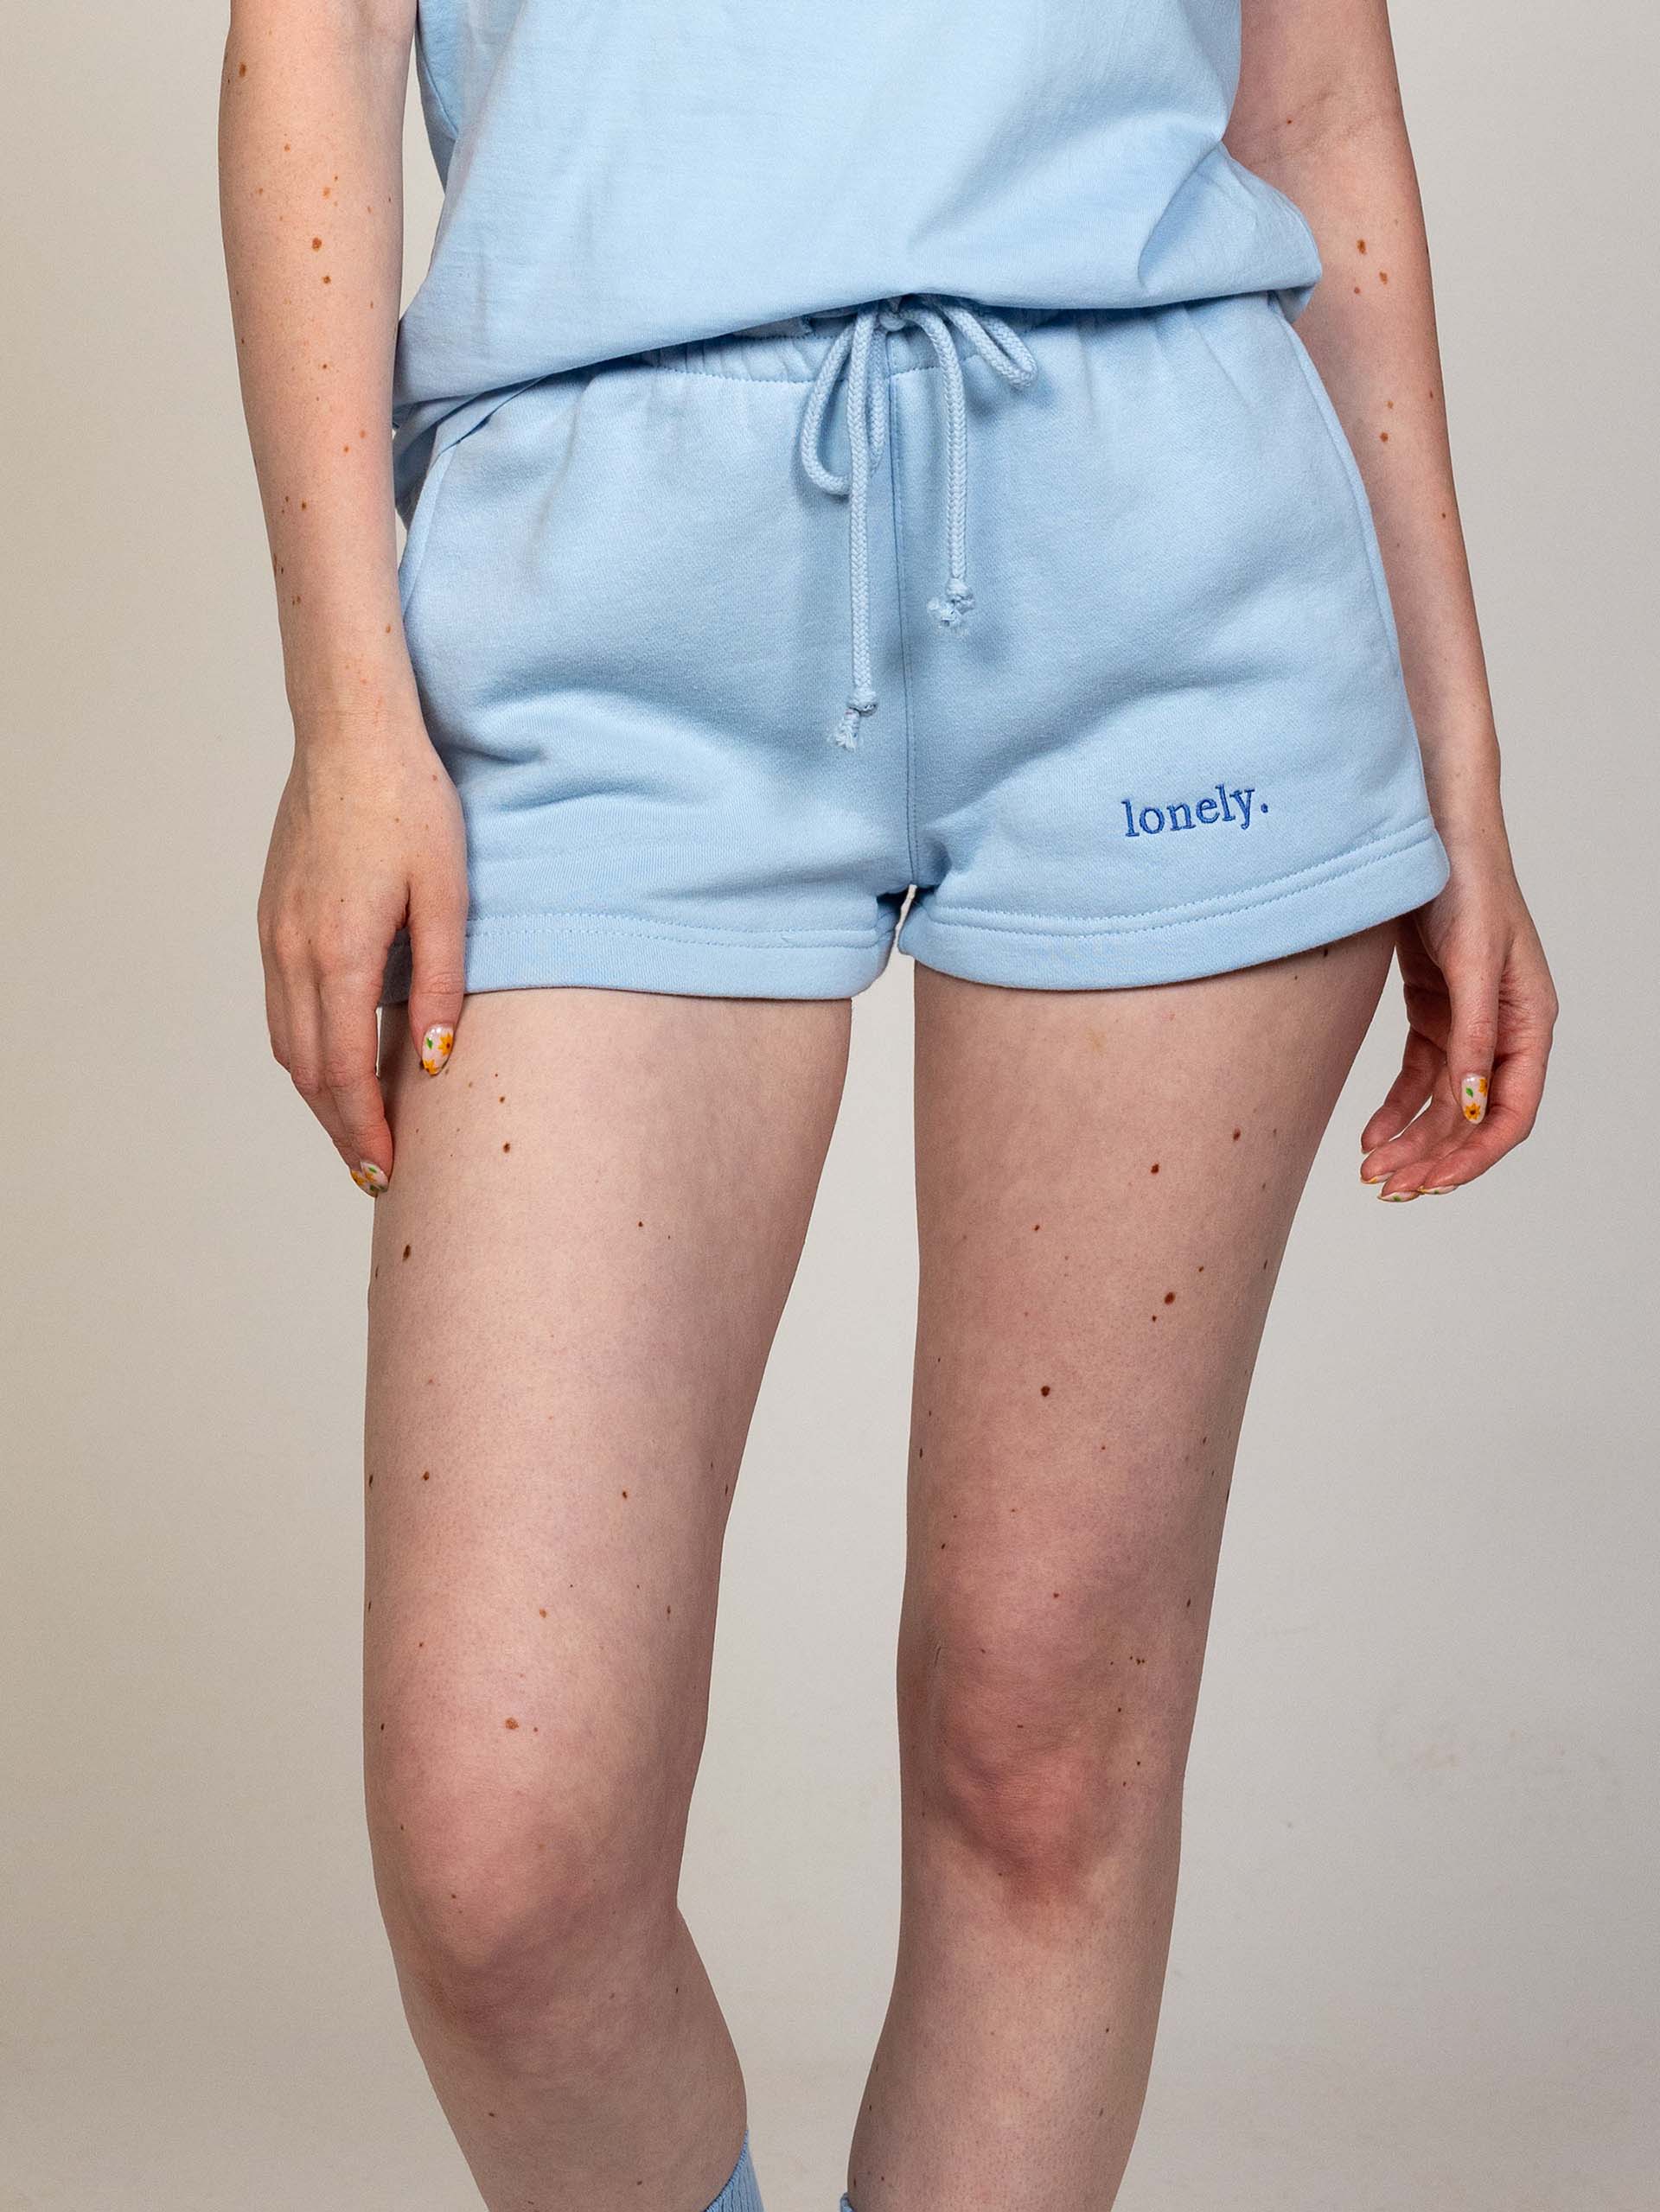 lonely 2" shorts